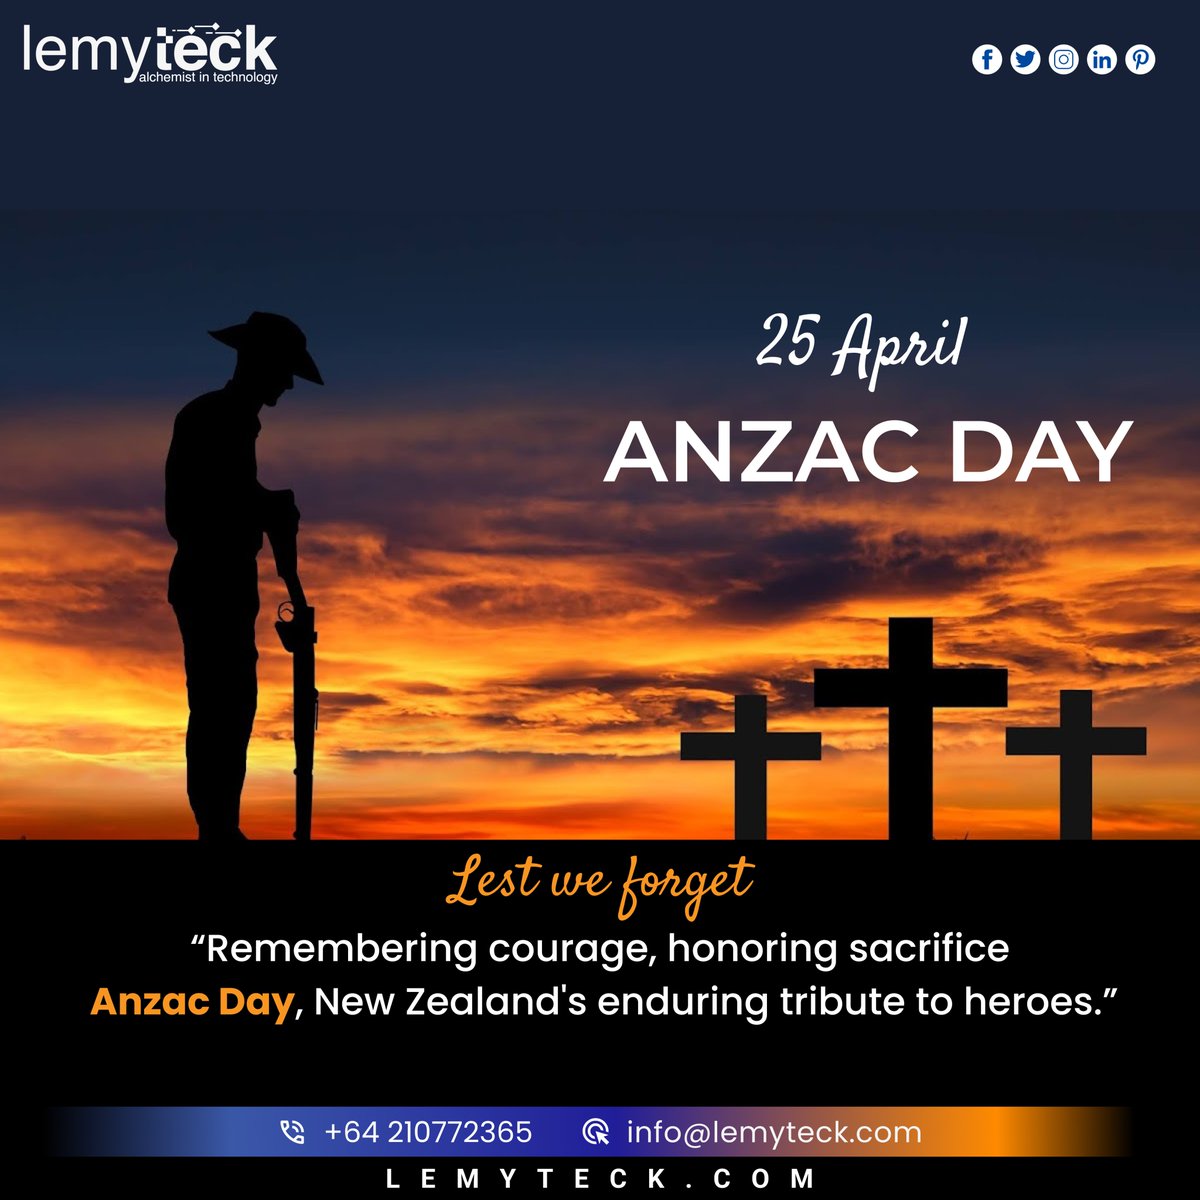 🌺🕯️ Remembering courage, honoring sacrifice: Anzac Day, New Zealand's enduring tribute to heroes. Let's unite in gratitude for their bravery and legacy. #lestweforget🌺 #anzacday2024🌹 #newzealandheroes #LegacyofHeroes #lemyteck